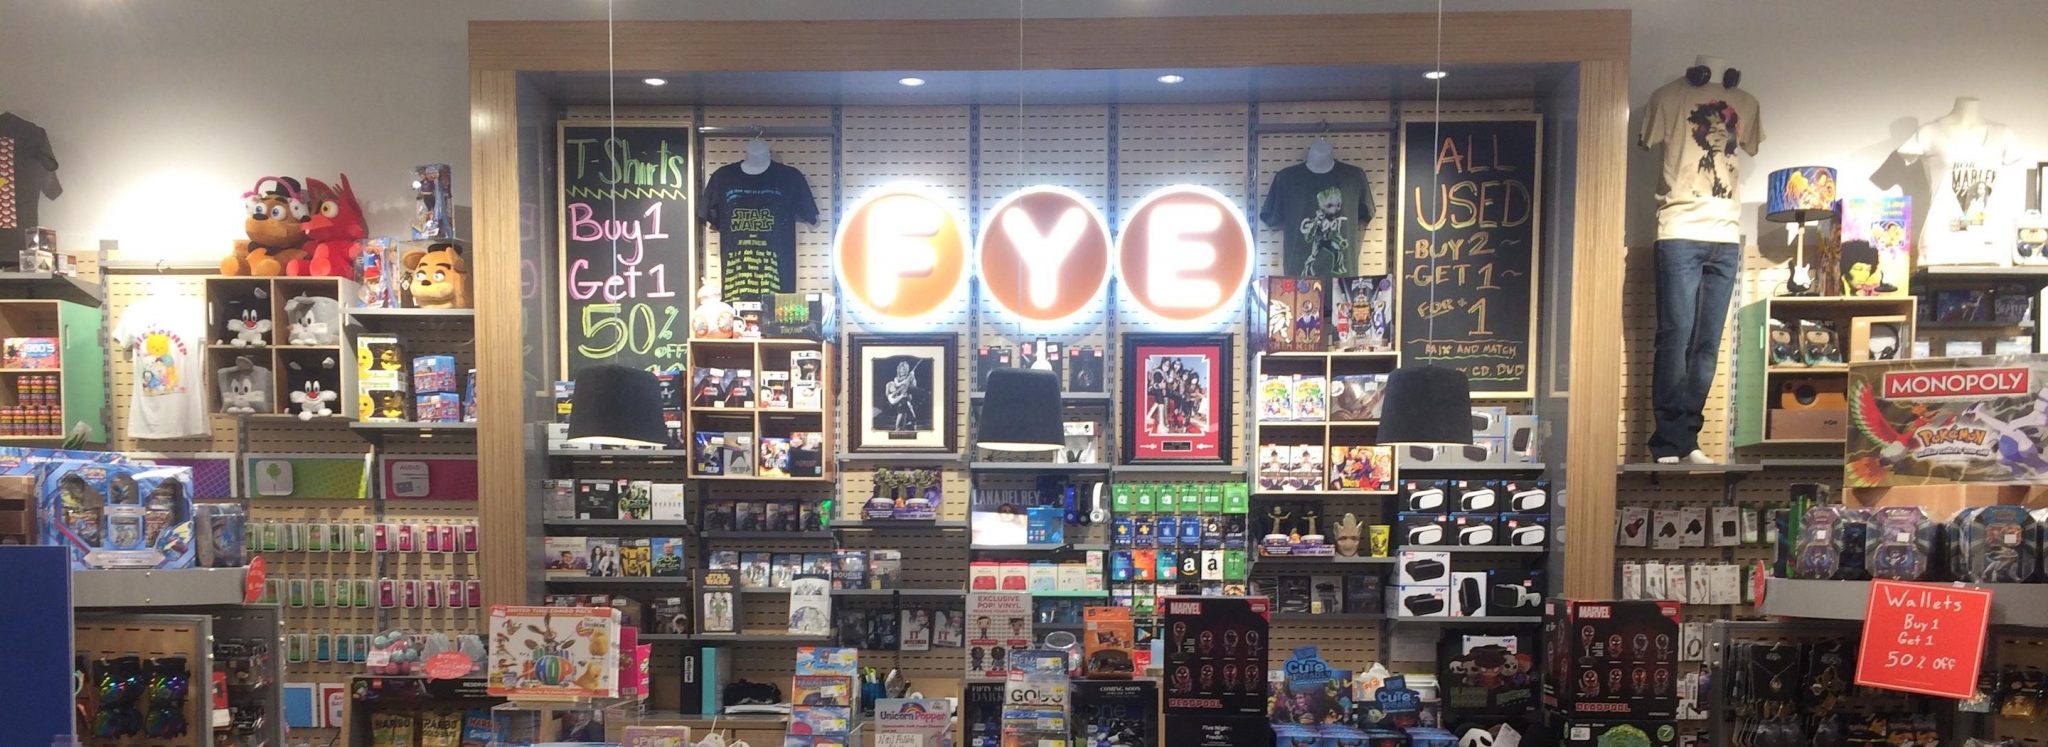 Sunrise Records to Buy Trans World Entertainment’s FYE Chain for $10 million image